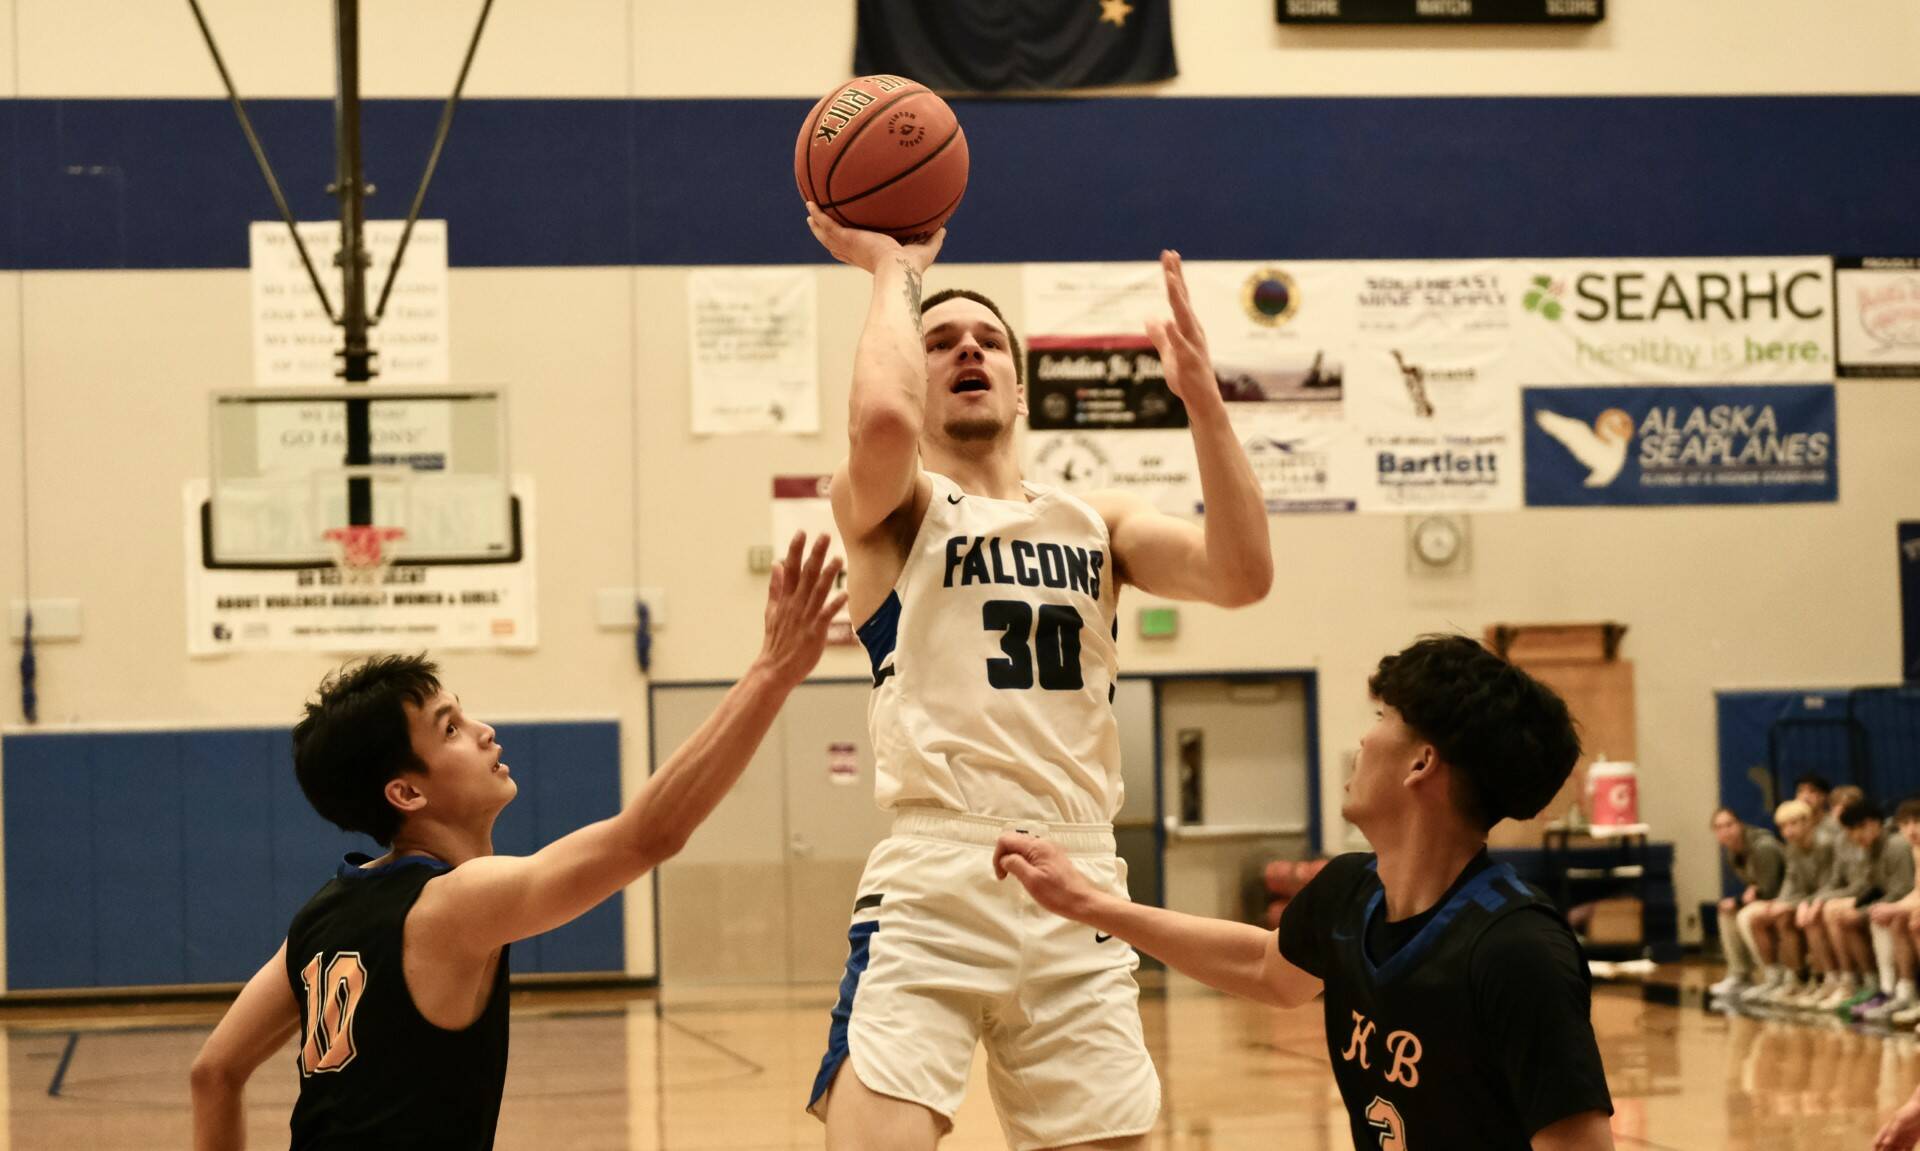 Thunder Mountain High School senior Thomas Baxter (30) shown in action against Kodiak on Thursday, scored 30 points to lead the Falcons over the Ketchikan Kings at Kayhi on Saturday. (Klas Stolpe/For the Juneau Empire)